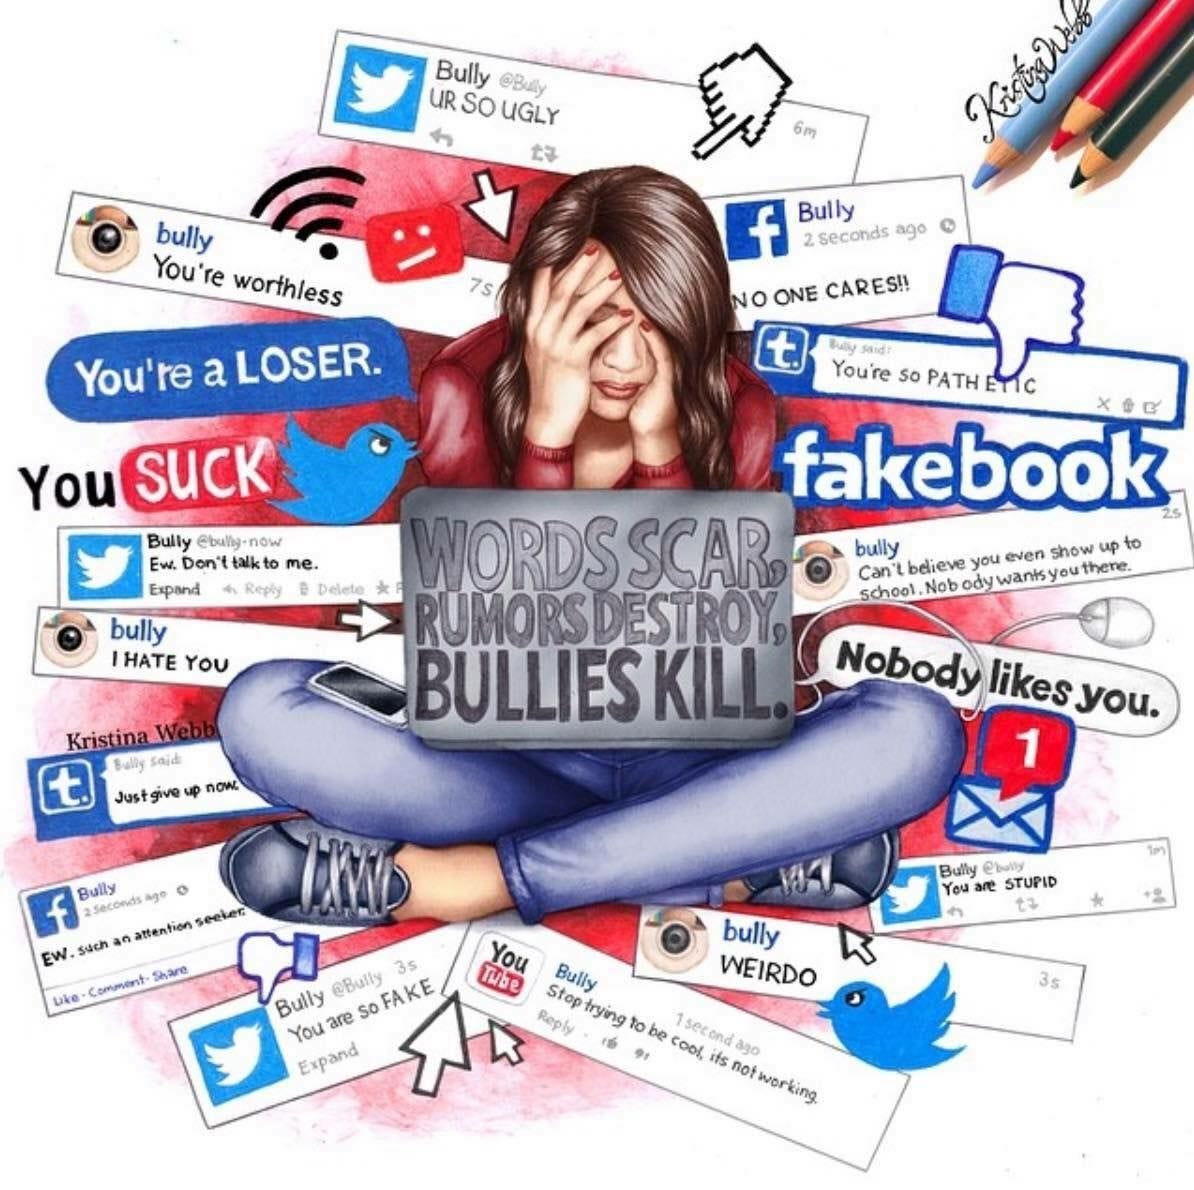 Cyberbullying - Bullying behind the screen. - It's not a child's play!